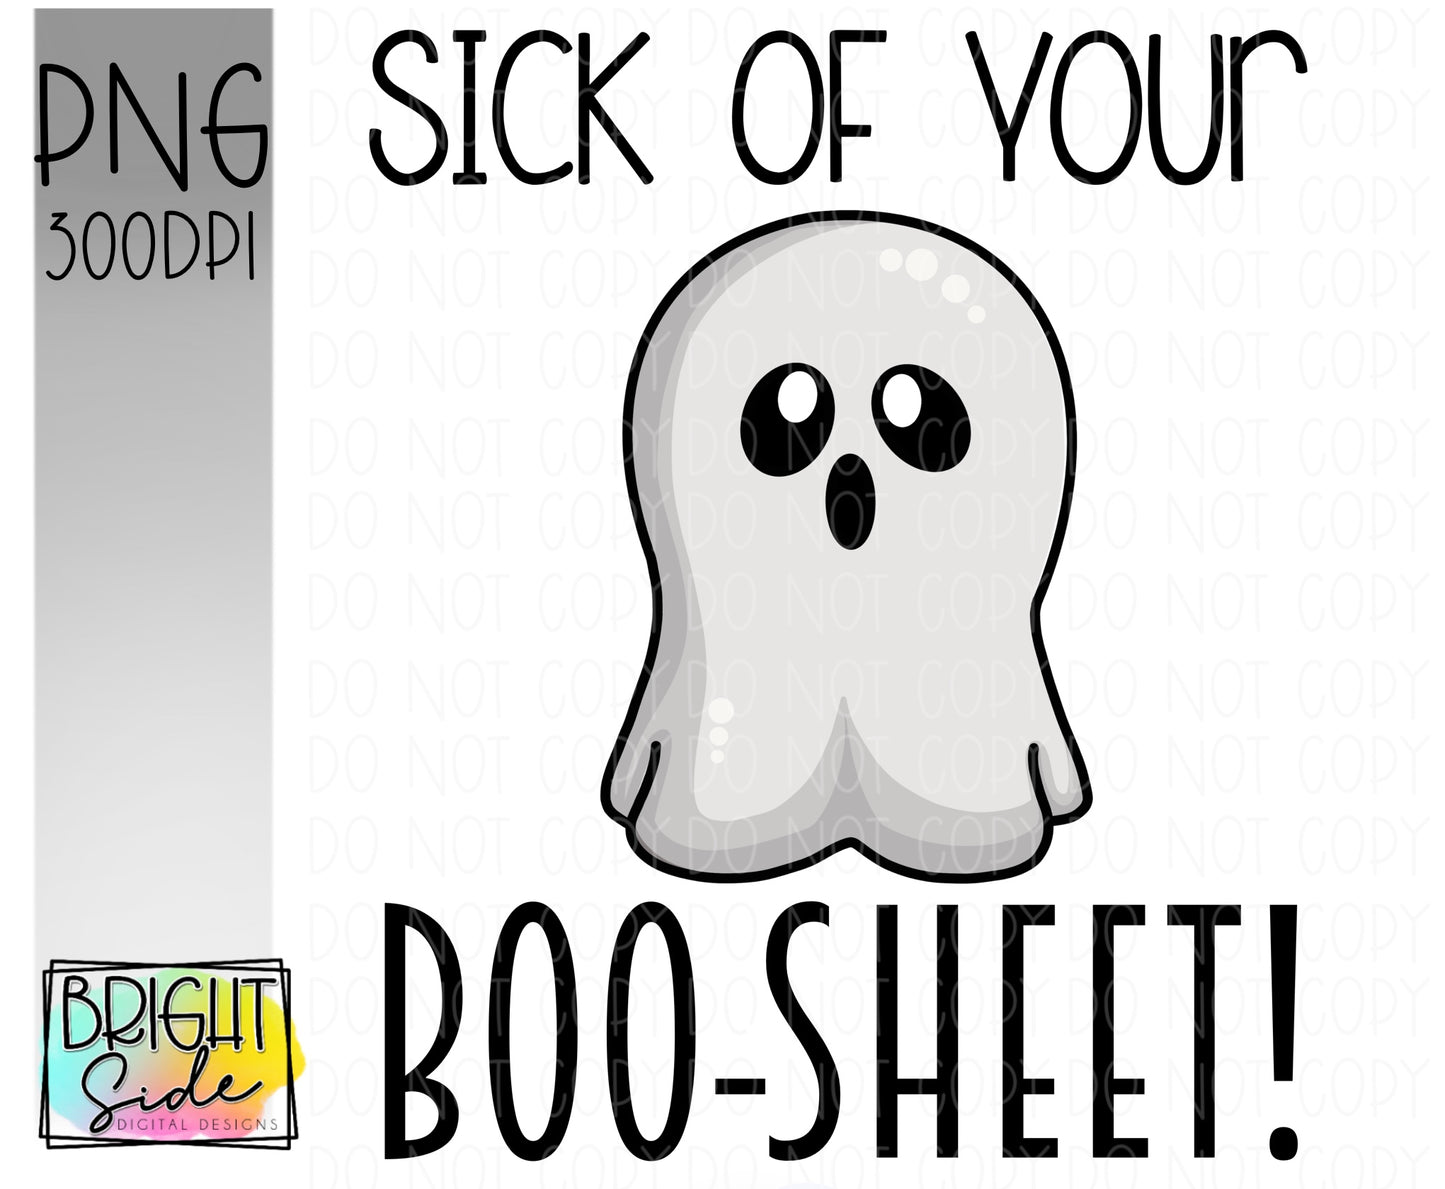 Sick of your boo-sheet